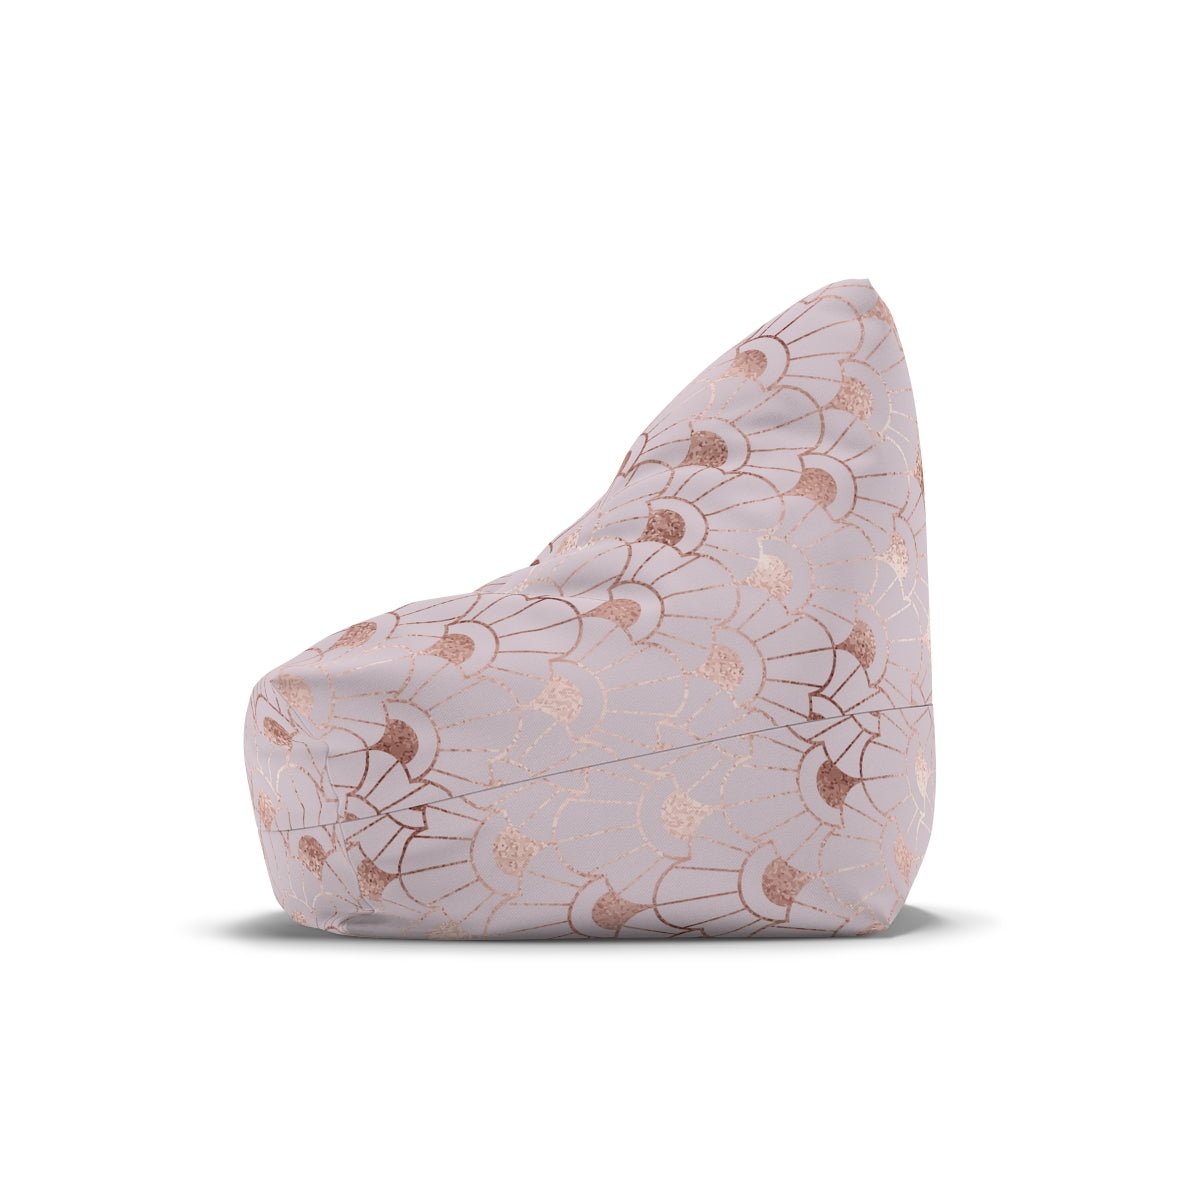 Rose Gold Art Deco Flowers Bean Bag Chair Cover - Puffin Lime